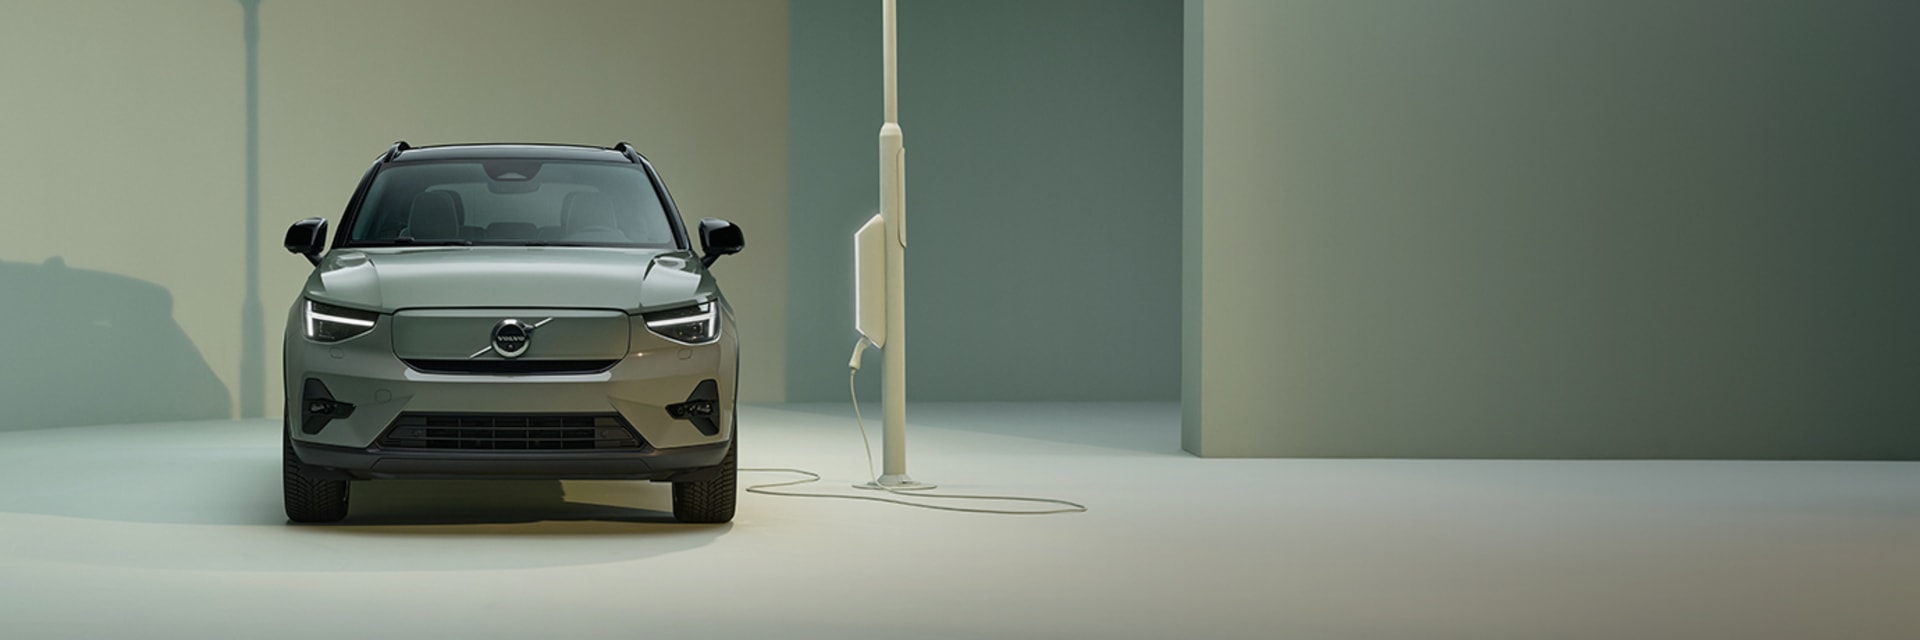 The fully electric Volvo XC40